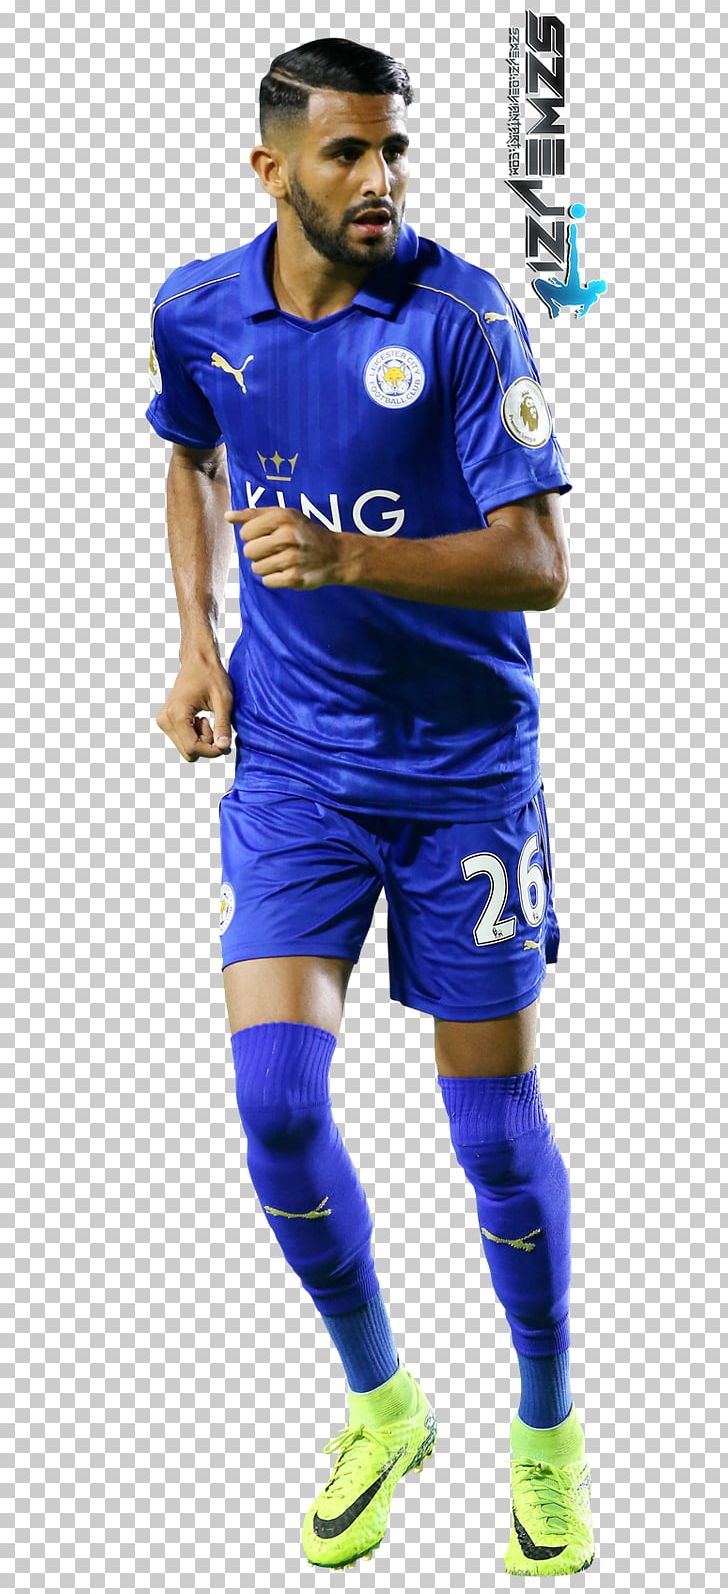 Riyad Mahrez Soccer Player Leicester City F.C. Football Rendering PNG, Clipart, Art, Blue, Clothing, Electric Blue, Football Free PNG Download